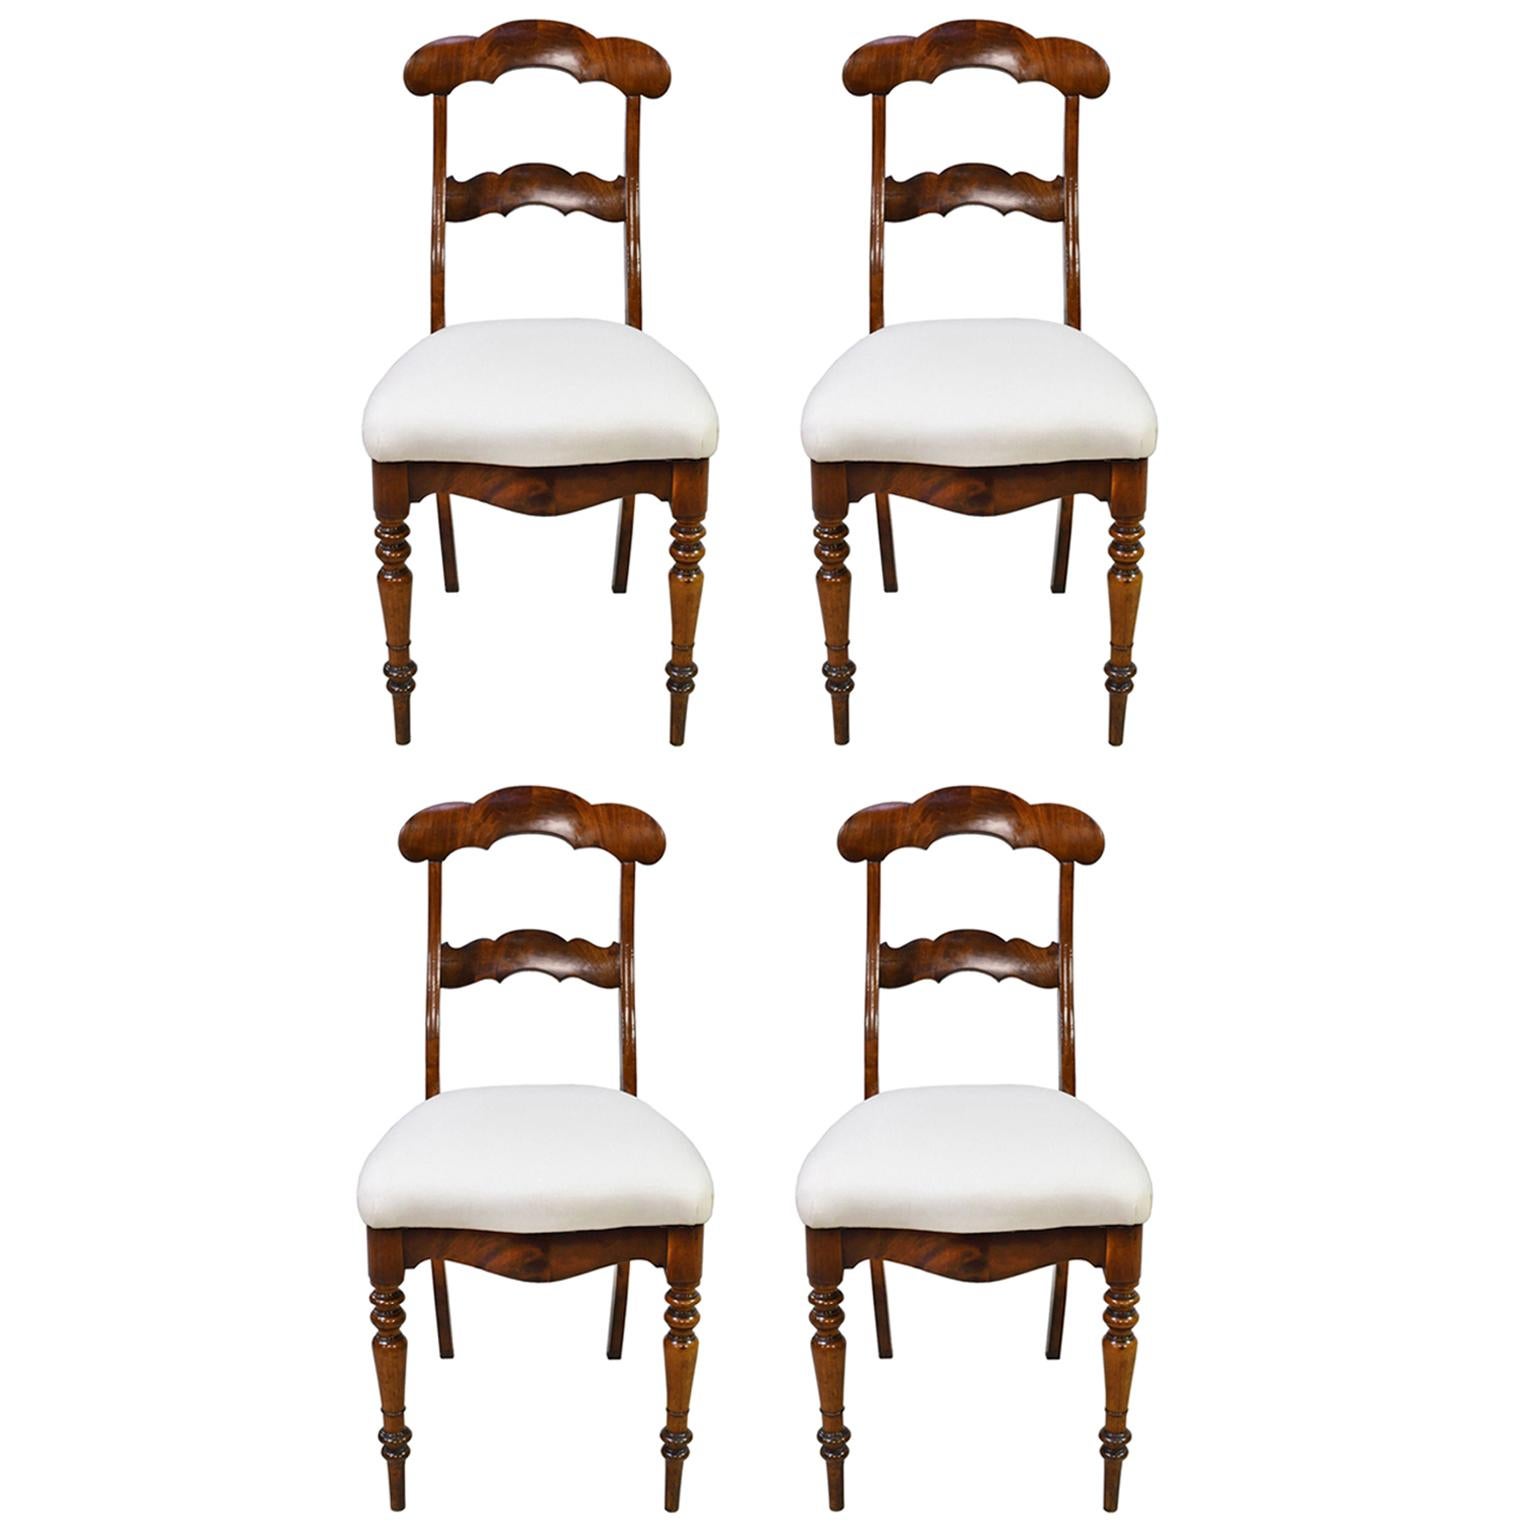 Set of 4 Biedermeier Mahogany Dining Chairs with Upholstered Seat, circa 1830